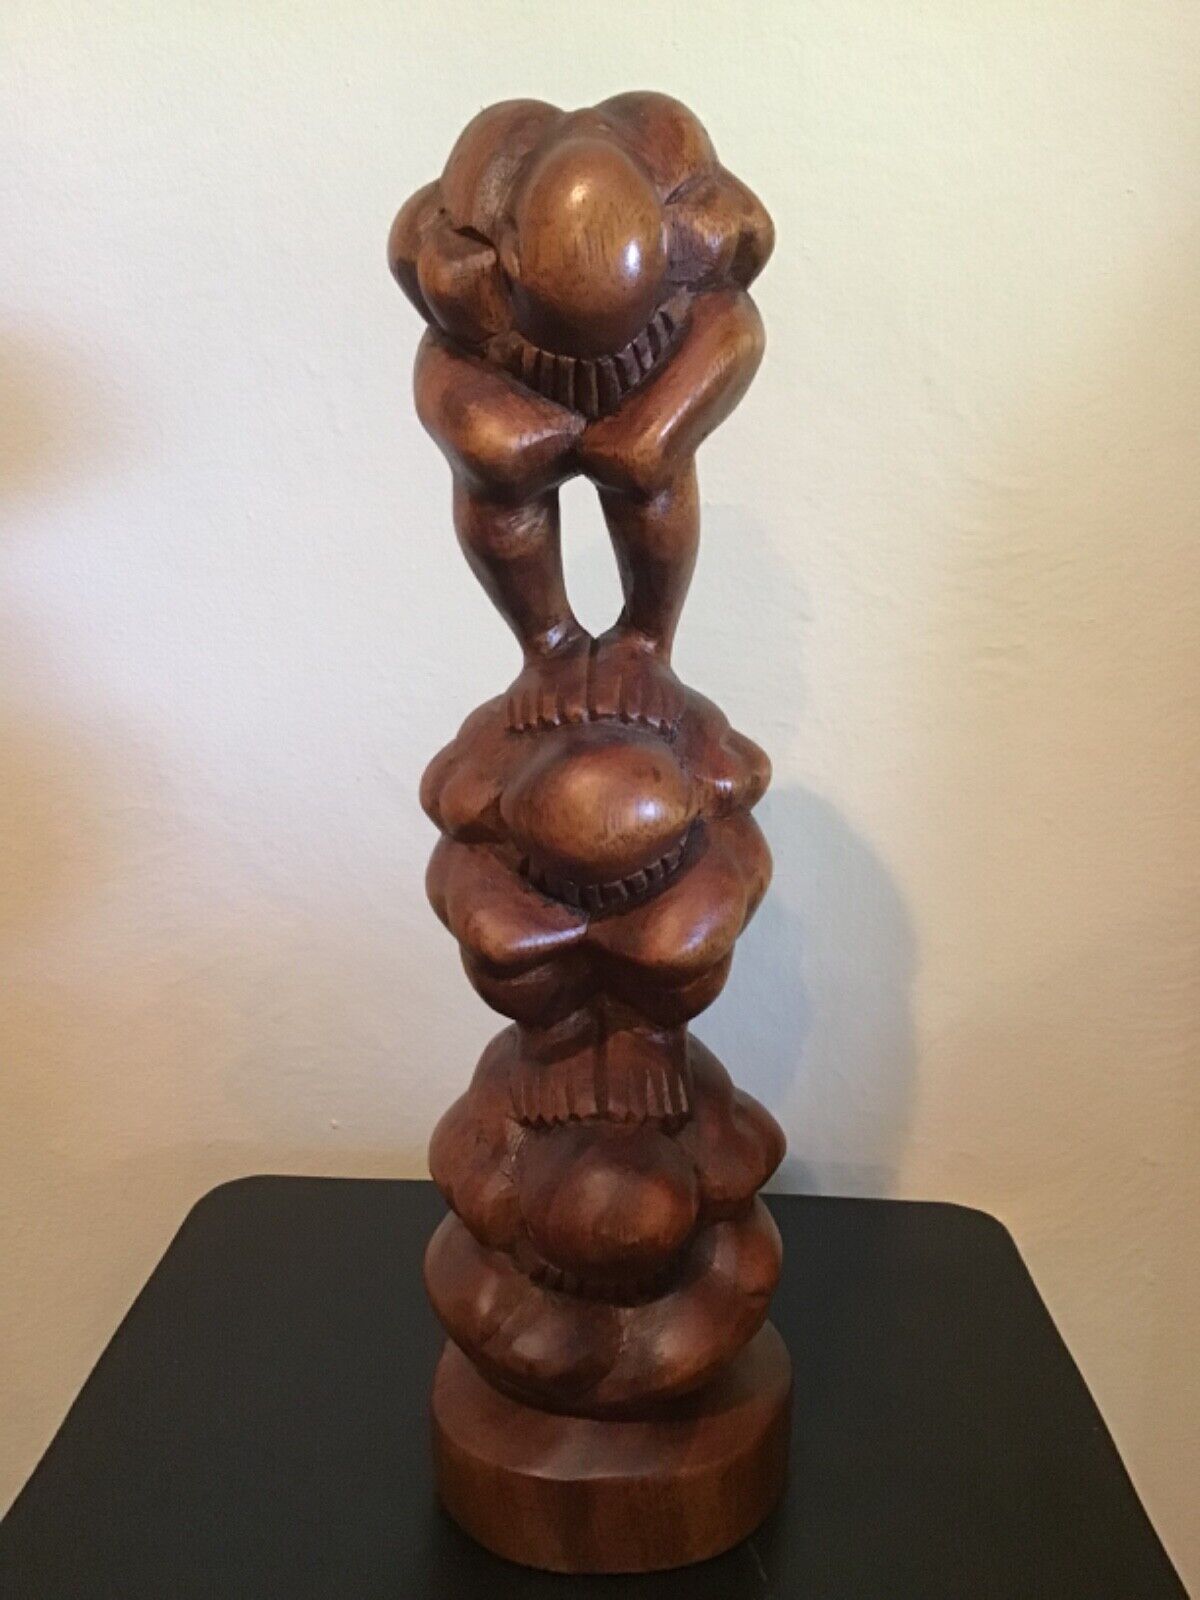 Large Vintage 12.25” Hand Carved Wood Weeping/Crying BUDDHA MAN Art Sculpture